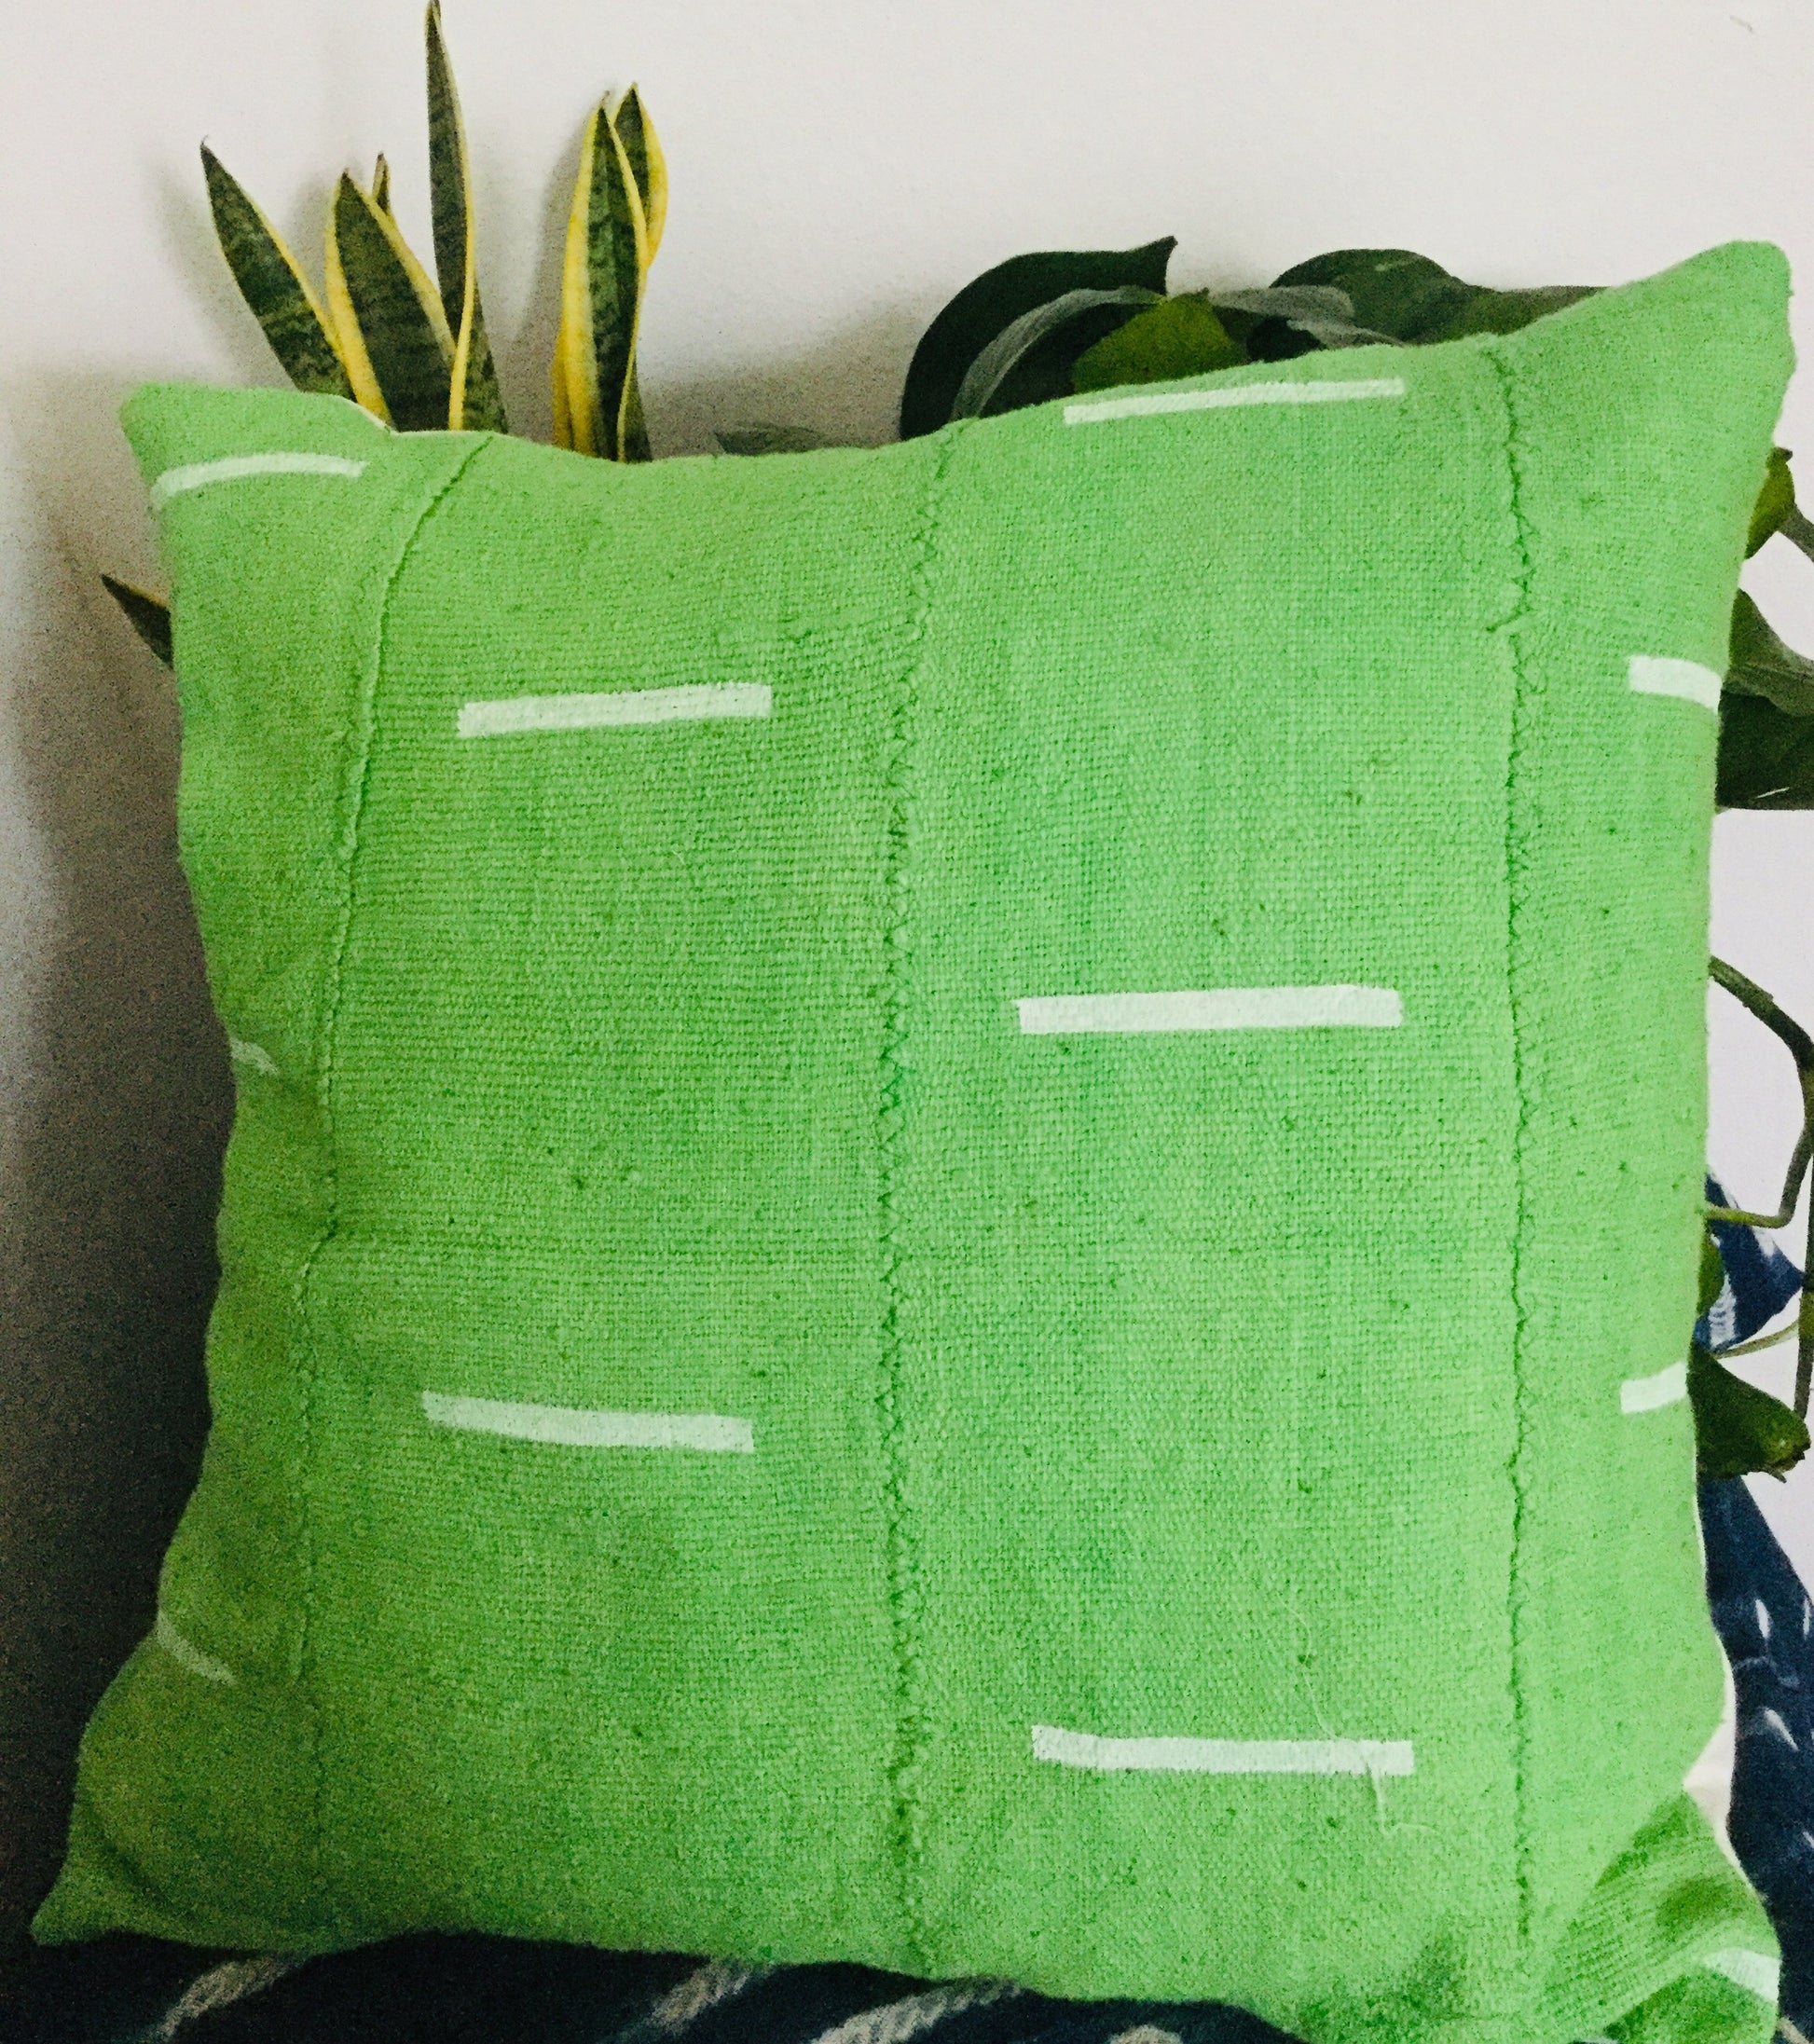 Single Lines on Lime Green Mudcloth Pillowcase.